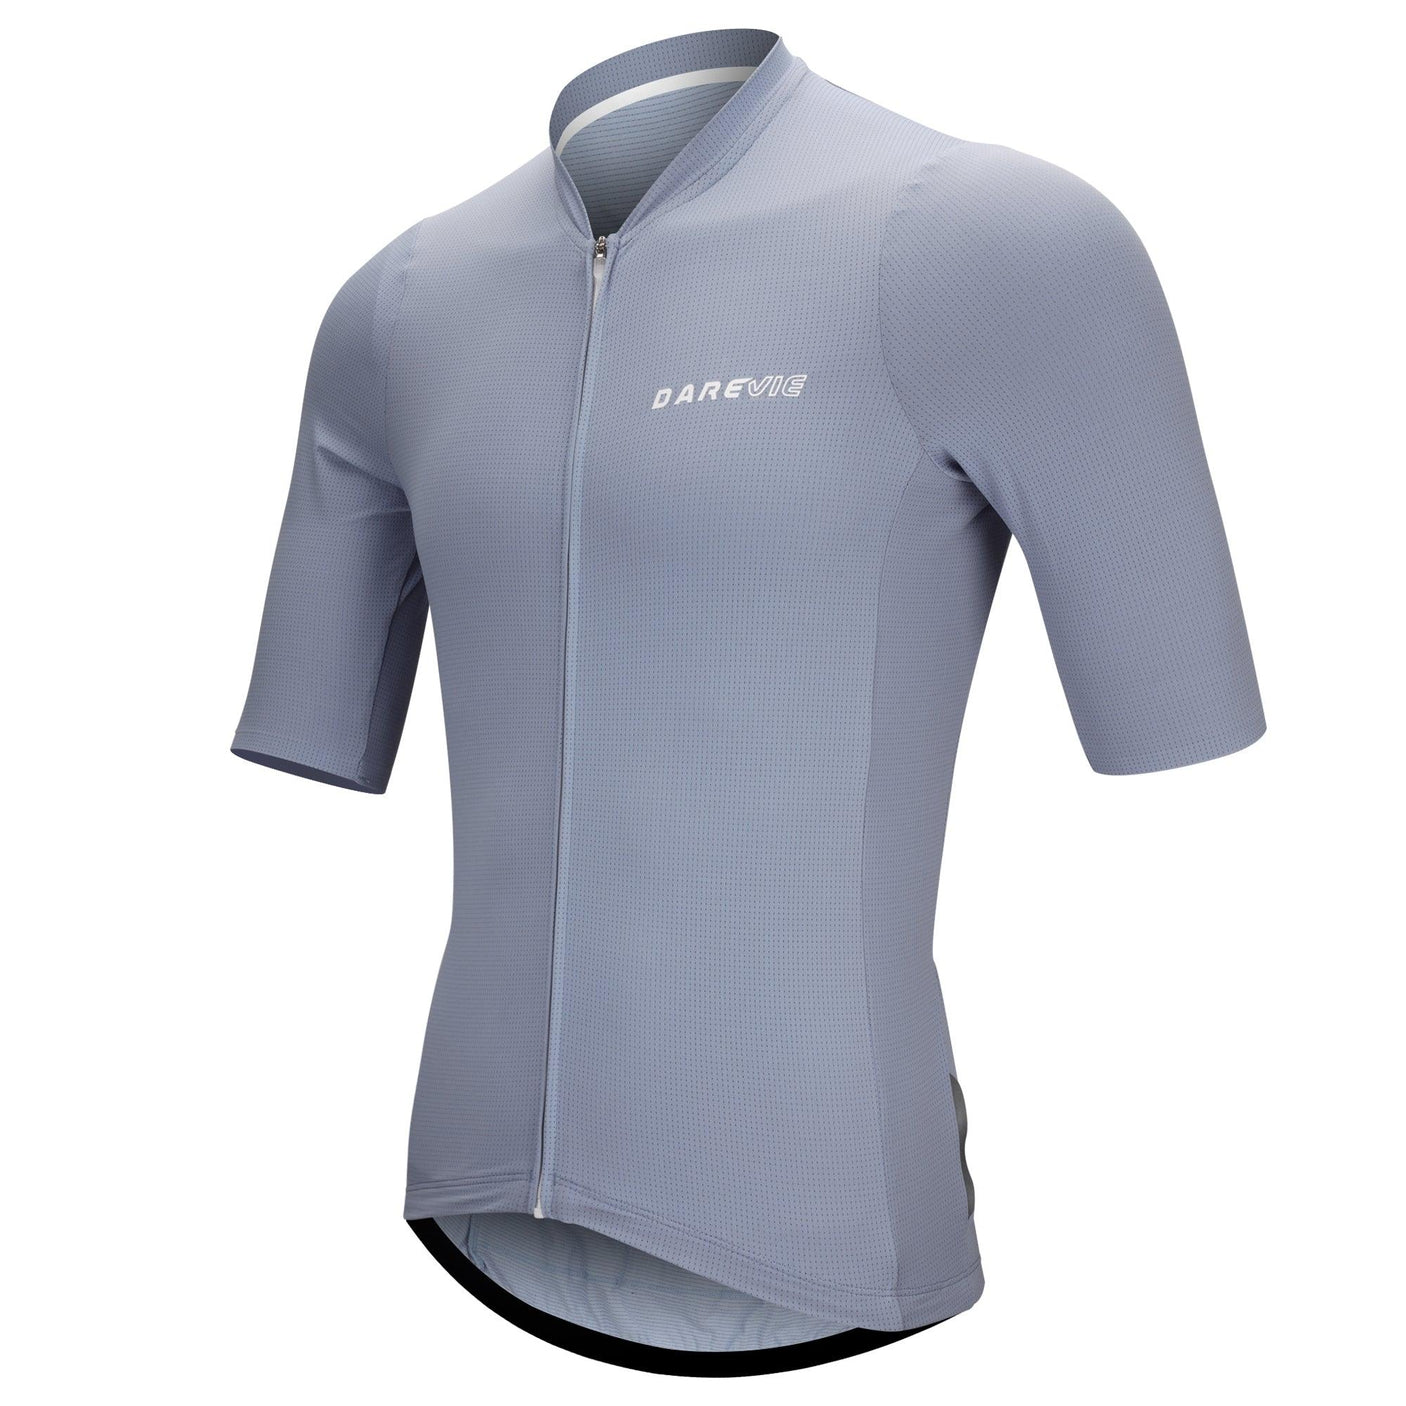 CARBON CYCLING JERSEY-Gray-Side-Darevie Shop